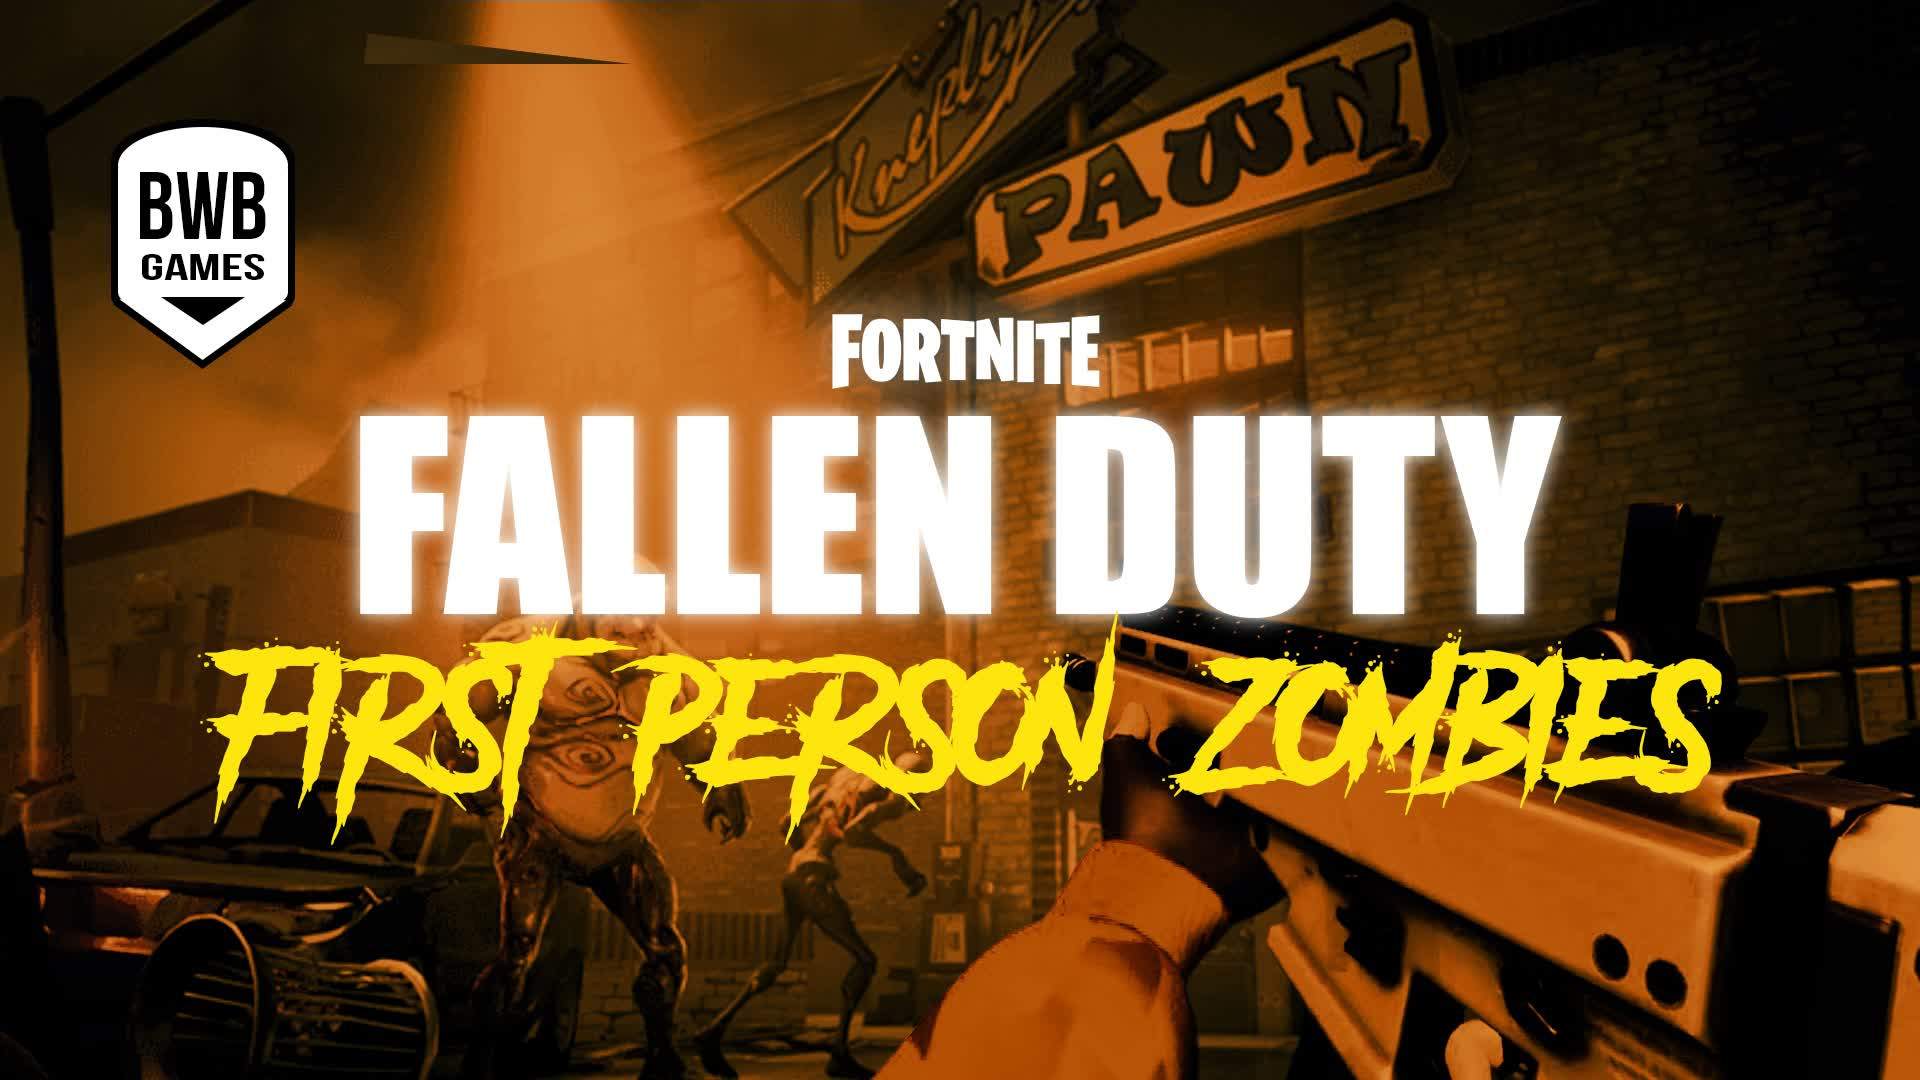 First Person Zombies